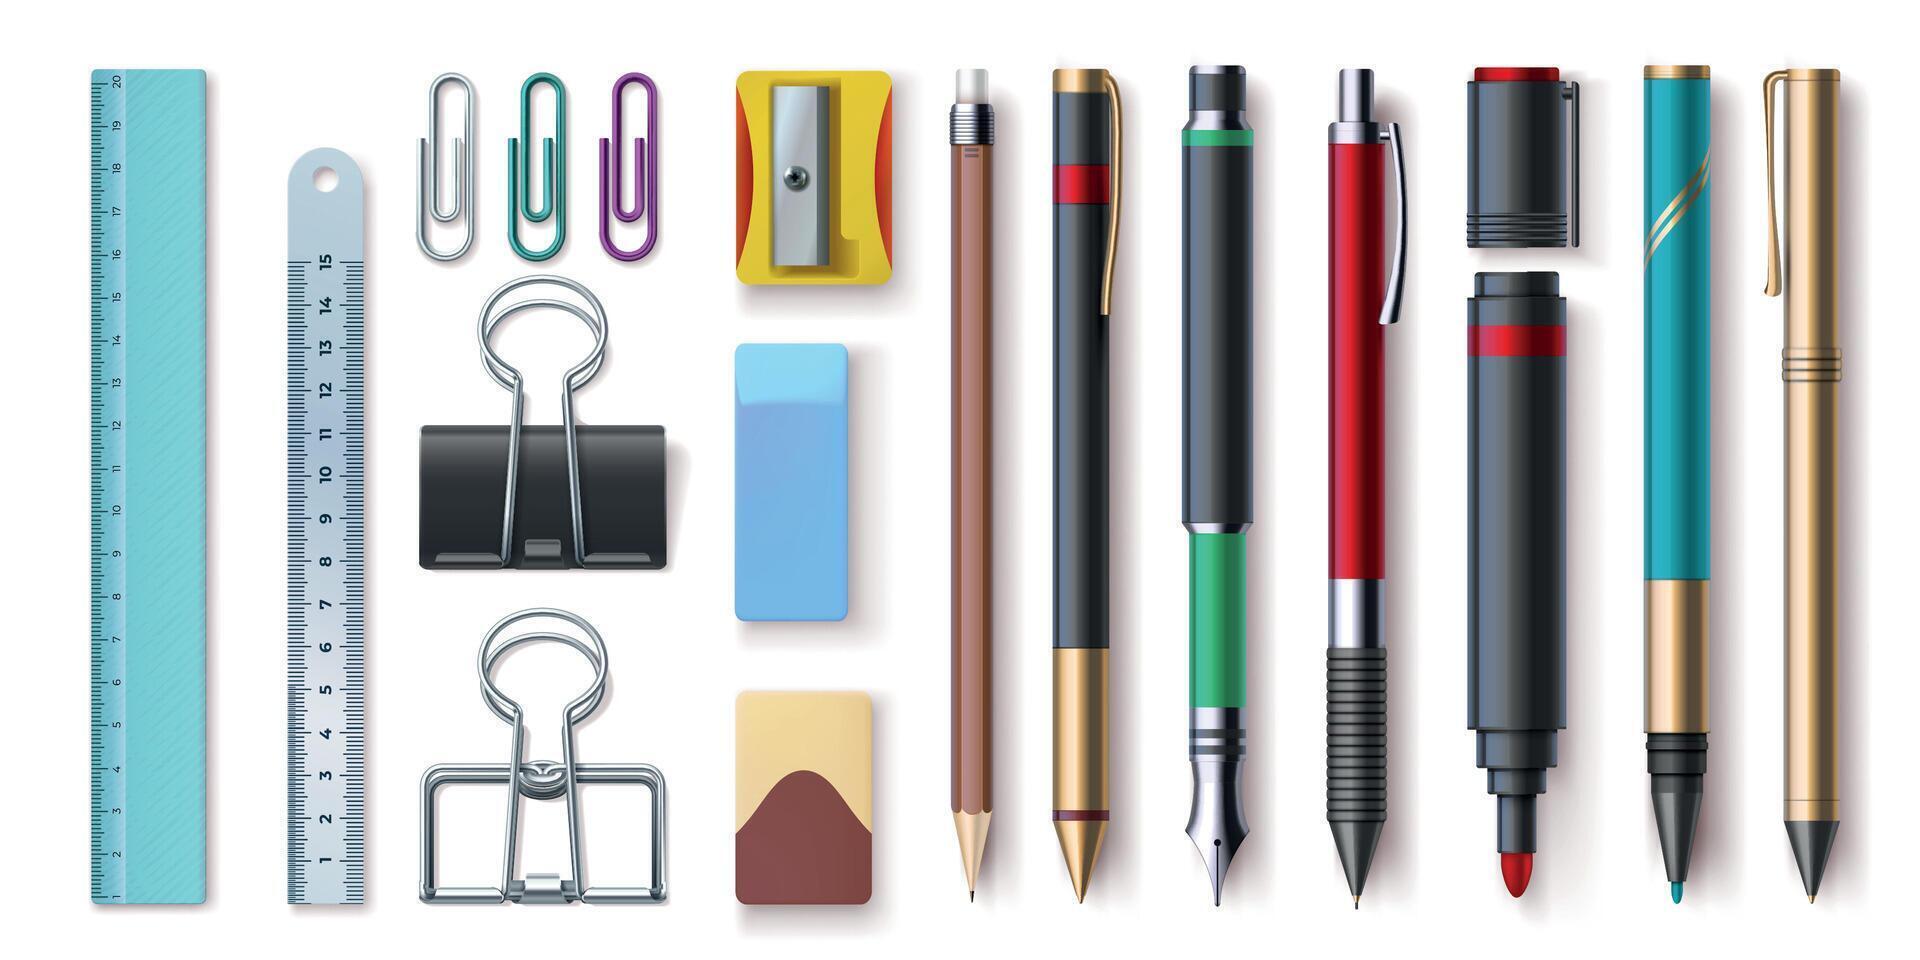 Realistic office stationery, writing tools, paper clips, and ruler. Pen, pencil, marker, sharpener and eraser. 3d school supplies vector set